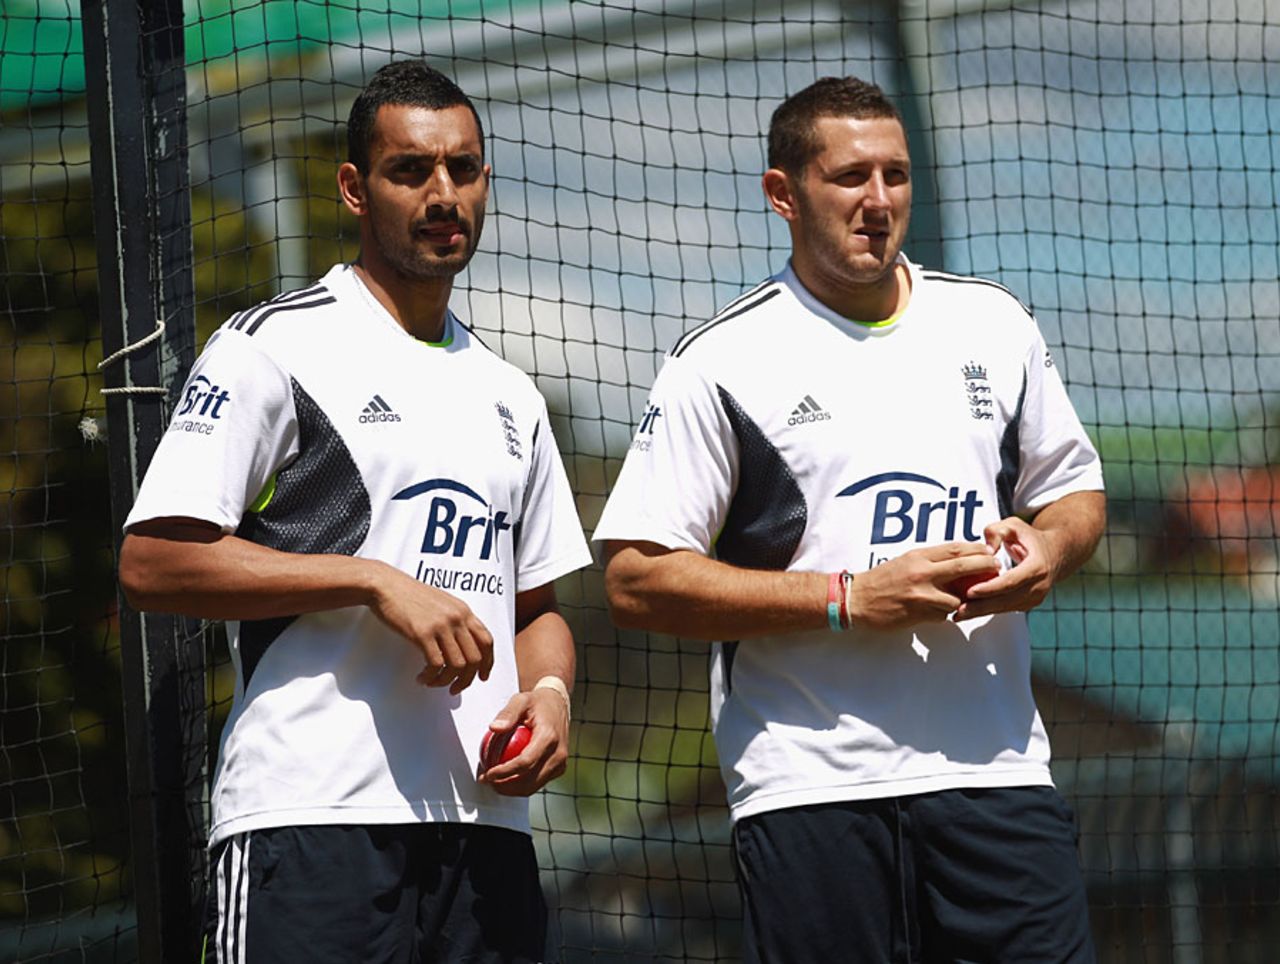 Ajmal Shahzad and Tim Bresnan will have their chance to shine against Australia A, Hobart, November 16, 2010